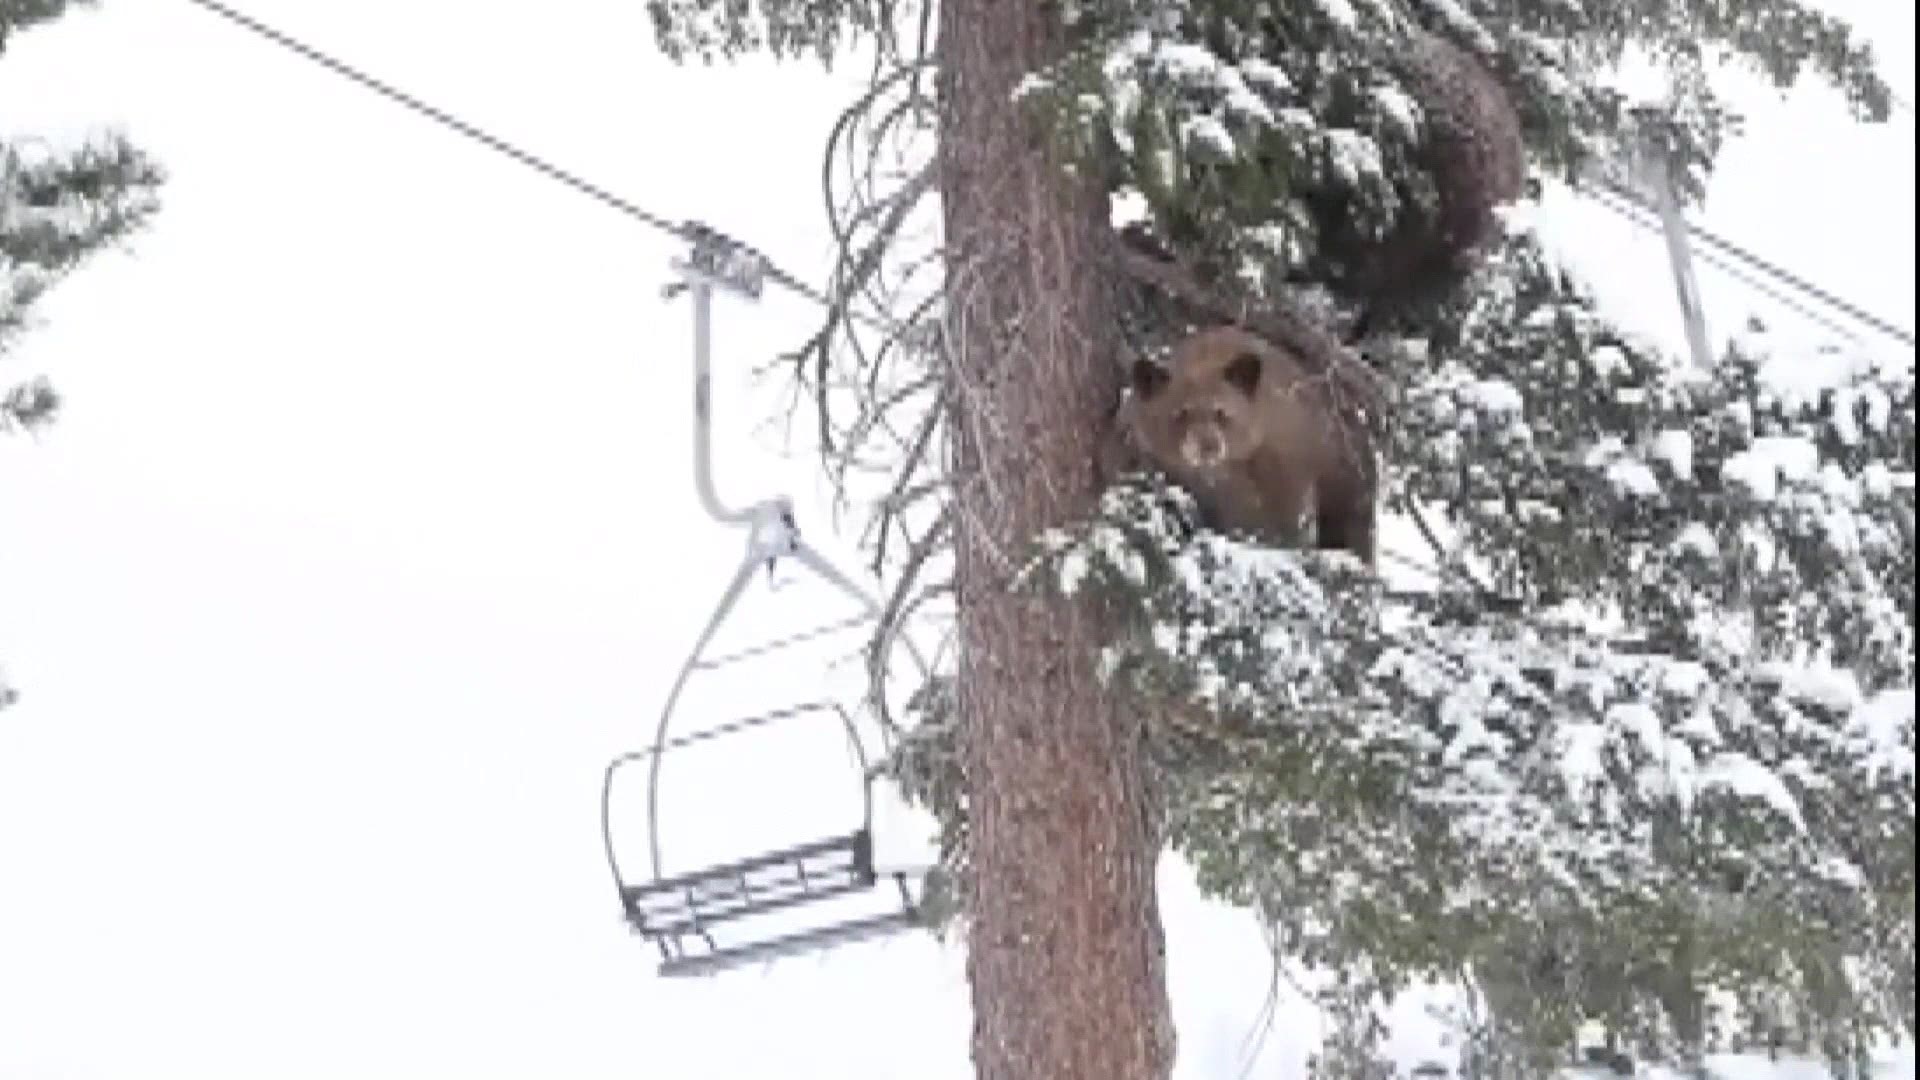 People riding up the lift at Mammoth Mountain in California got a close-up look at a baby and mama bear perched in a tree. The two eventually climbed down and left.